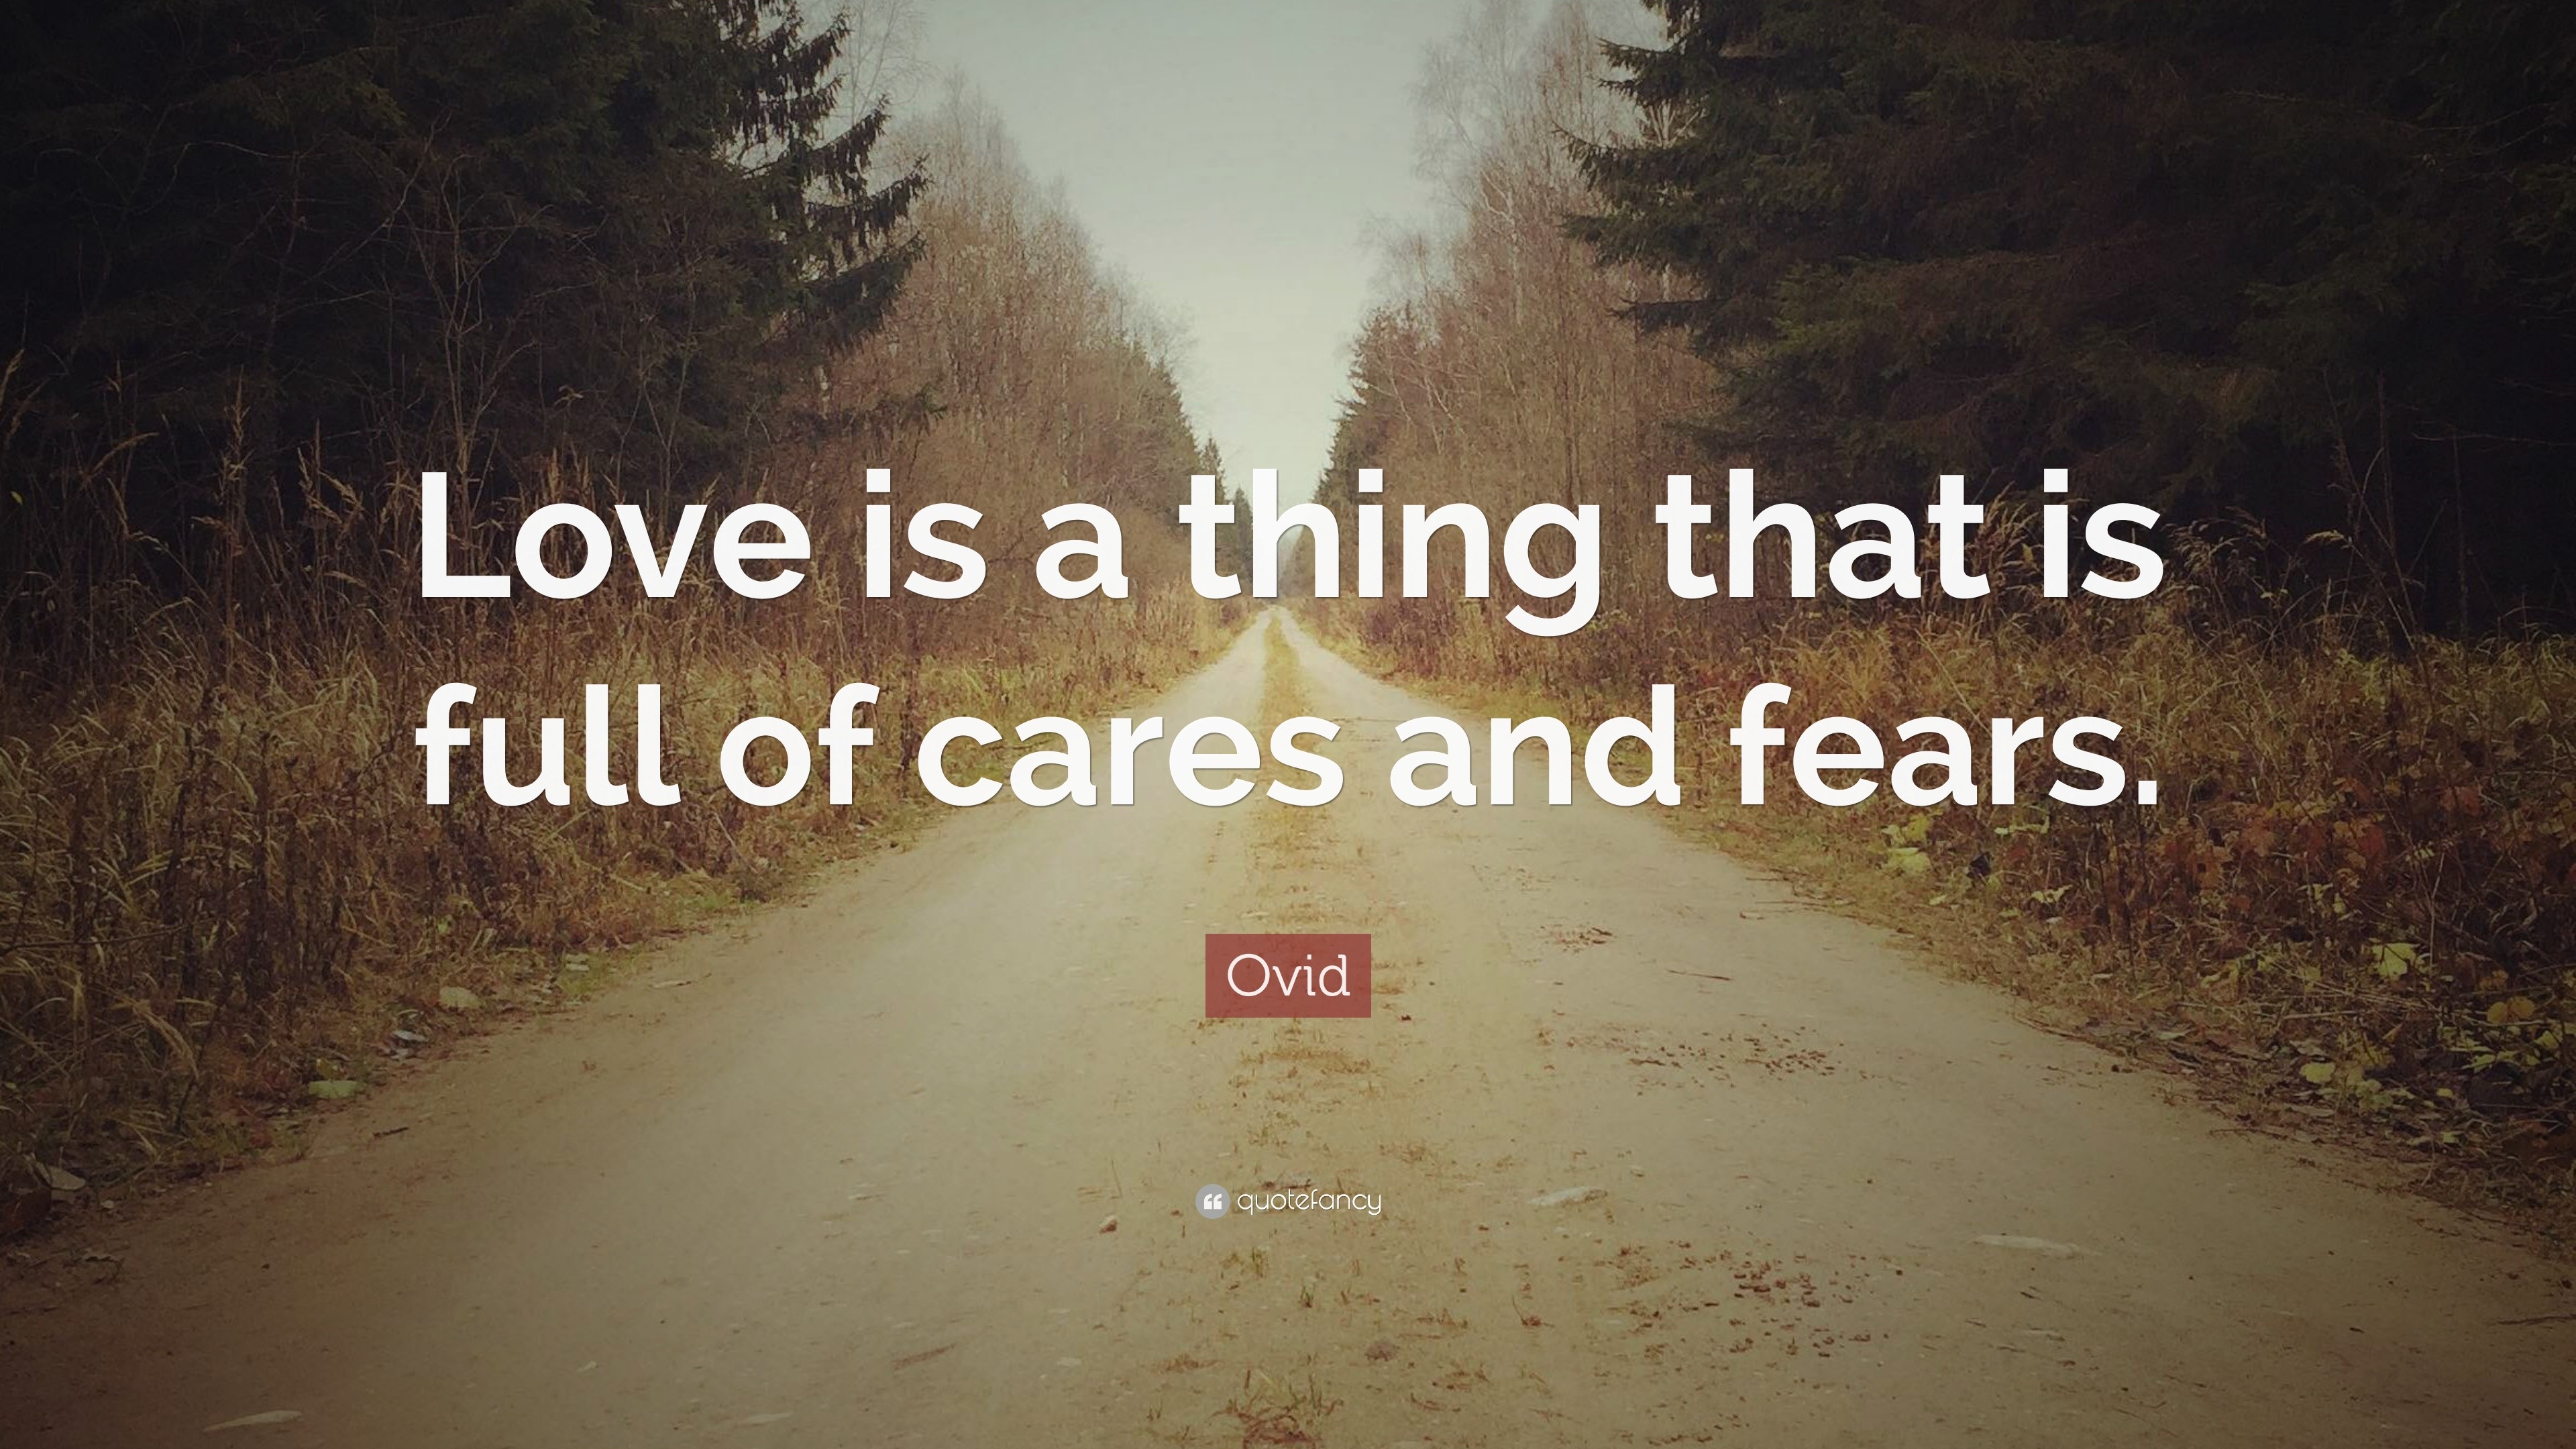 Ovid Quotes (100 wallpapers) Quotefancy